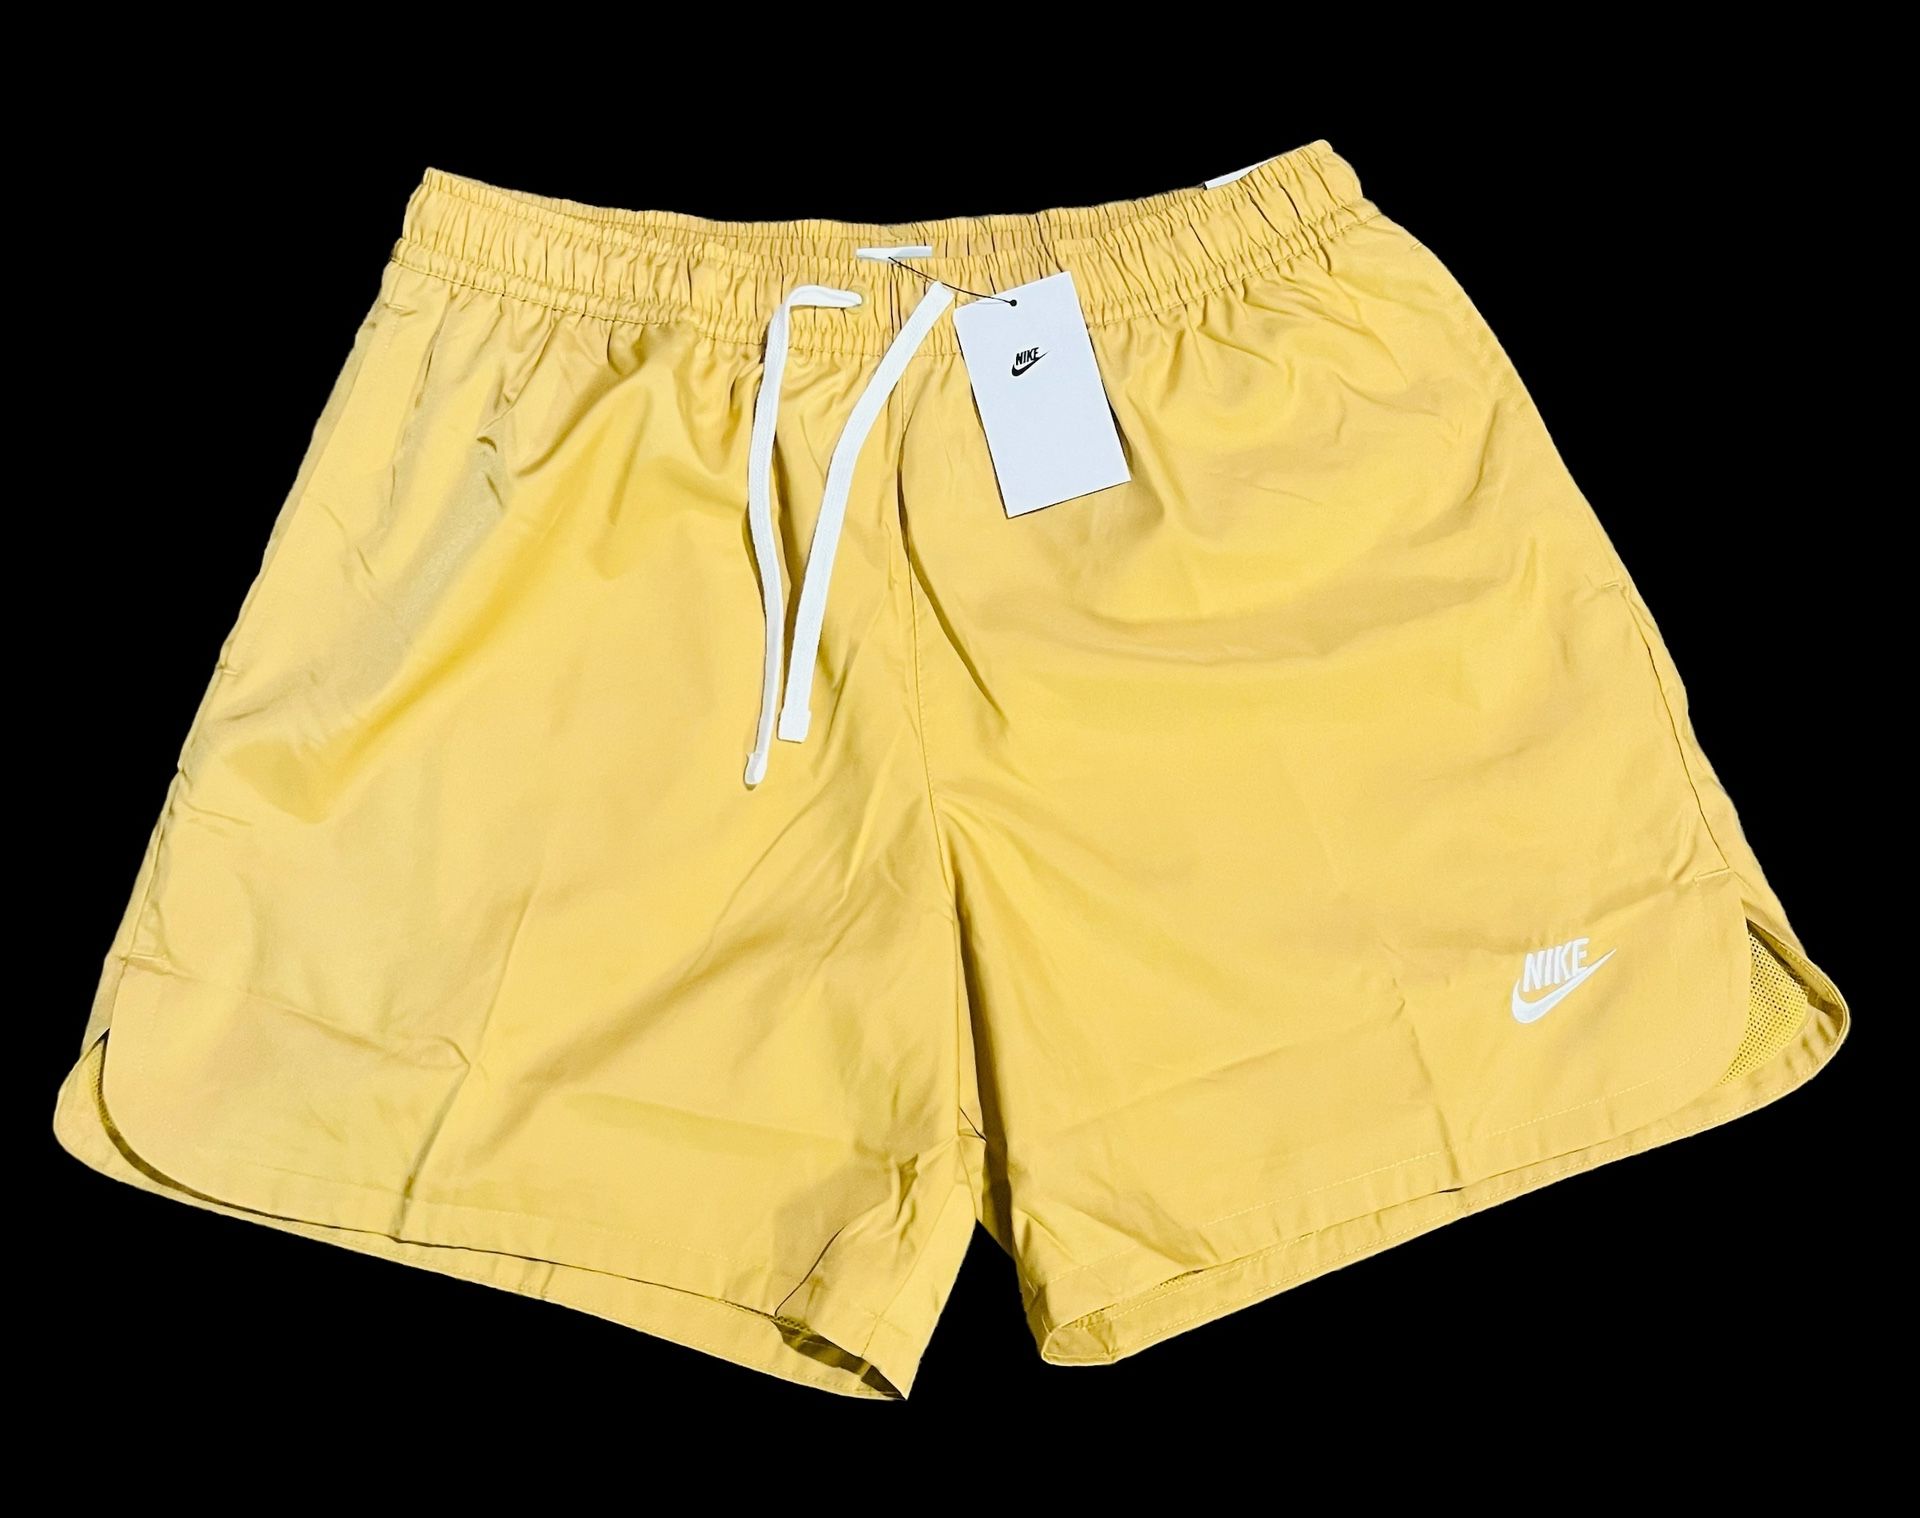 Nike Sportswear Club Woven Lined Flow Gold Shorts Men’s Size LARGE NWT